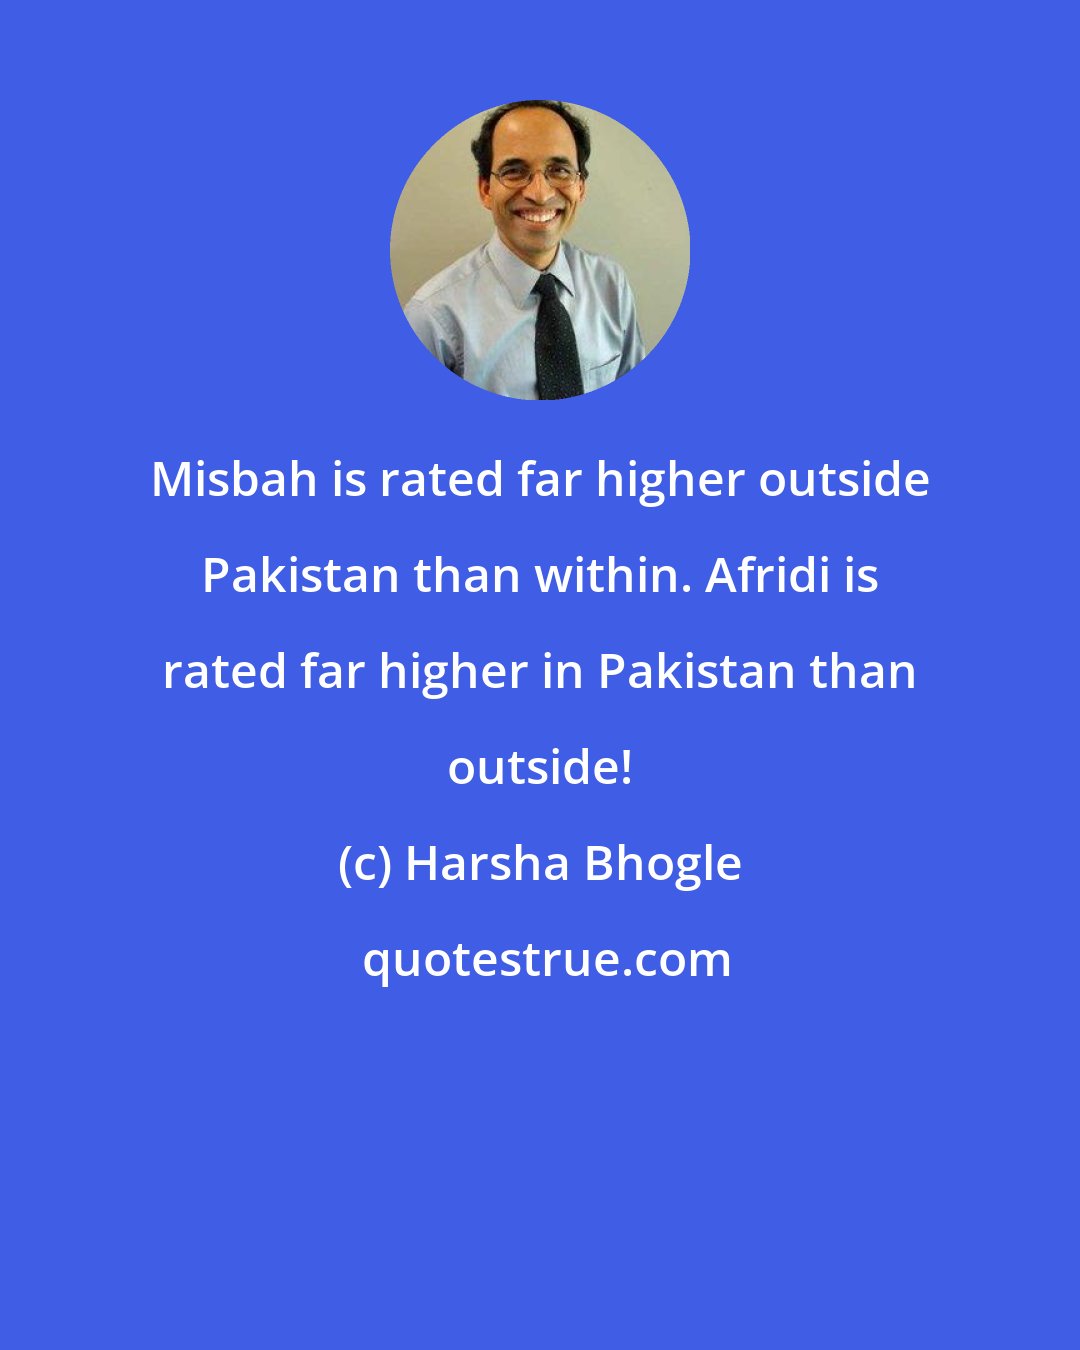 Harsha Bhogle: Misbah is rated far higher outside Pakistan than within. Afridi is rated far higher in Pakistan than outside!